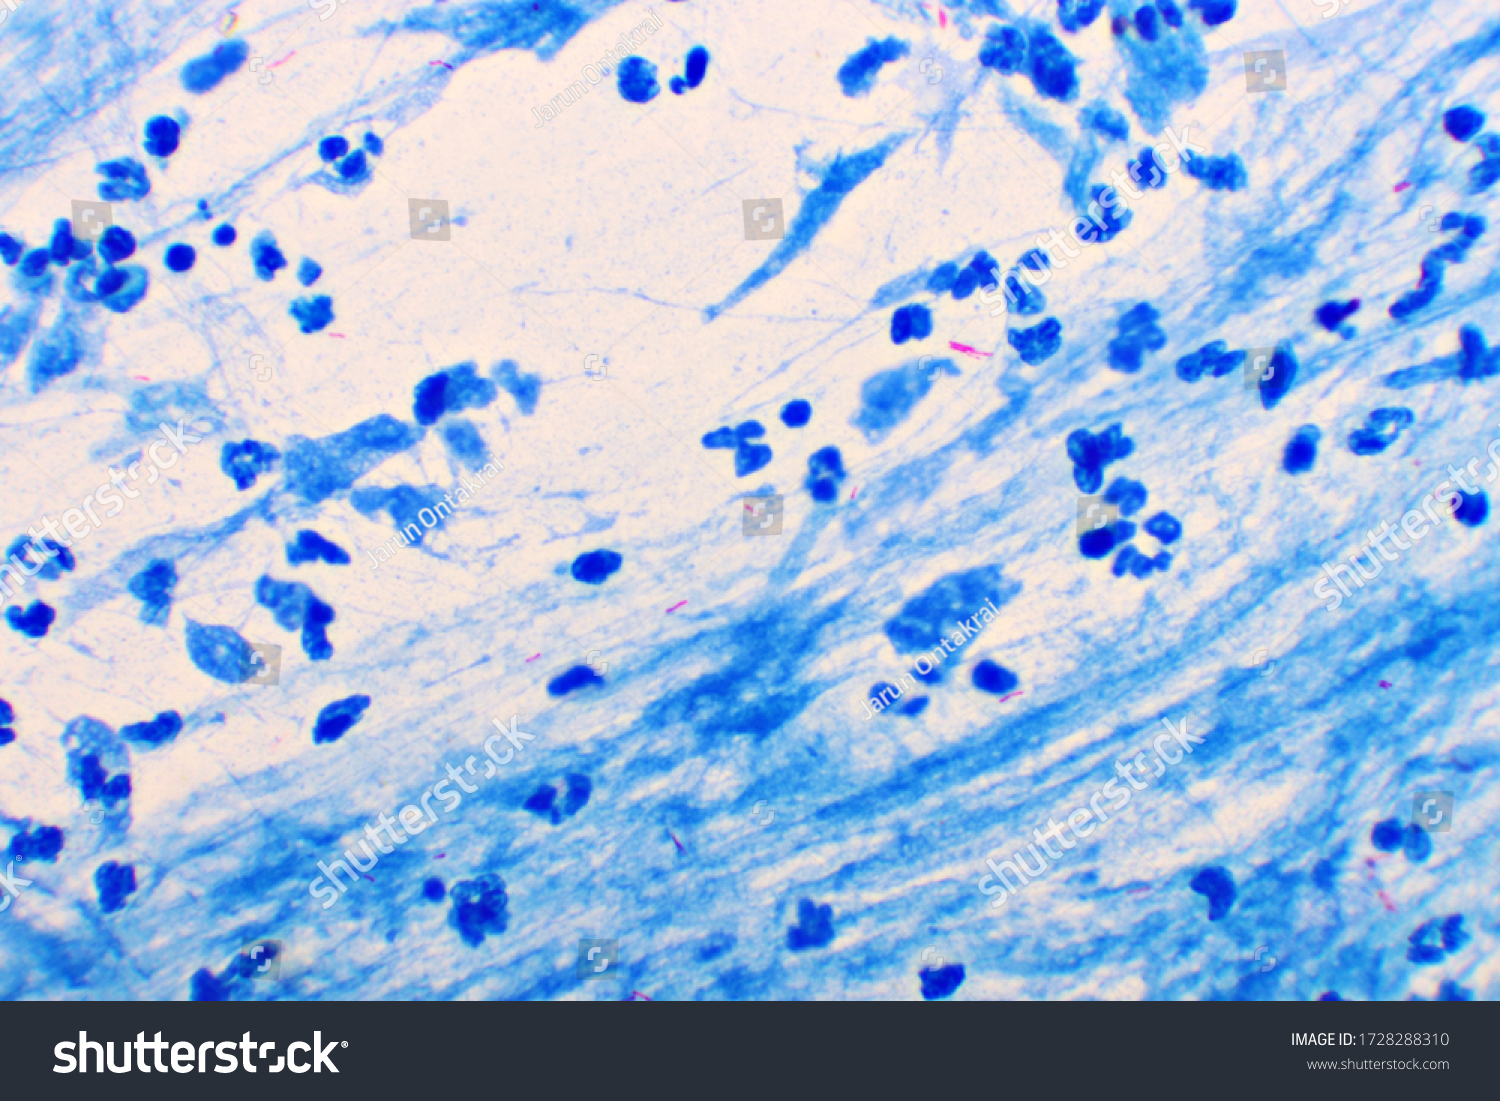 Mycobacterium Tuberculosis Positive Small Red Rod Stock Photo ...